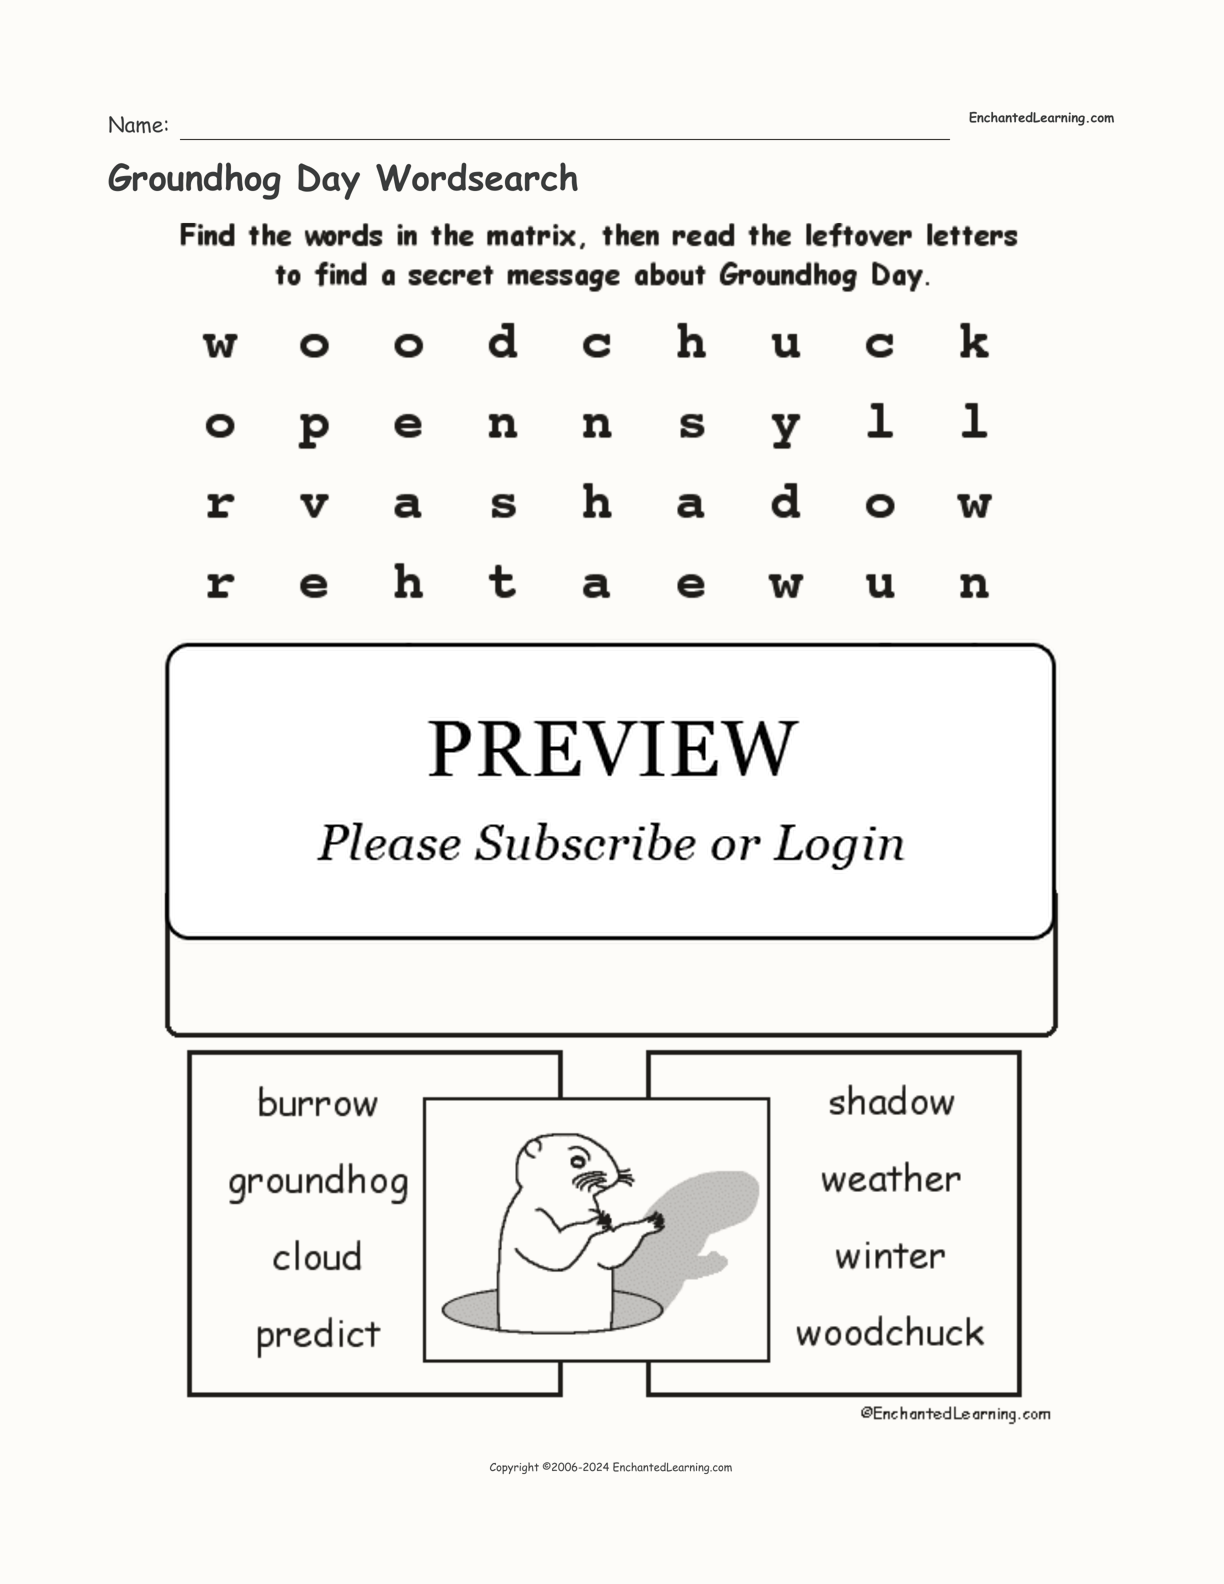 Groundhog Day Wordsearch interactive worksheet page 1